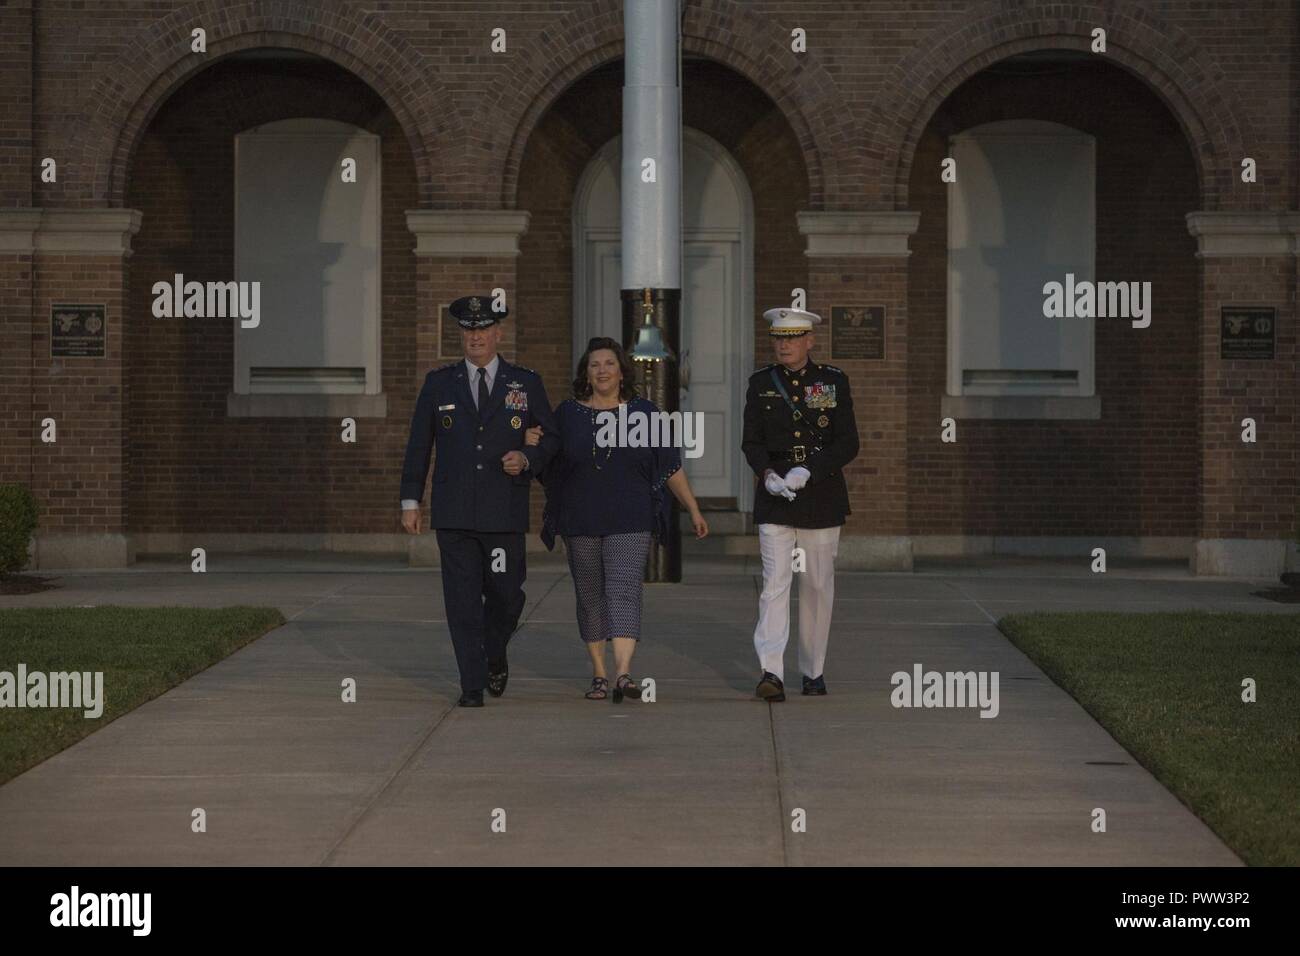 U.S. Air Force Lt. Gen. Thomas J. Trask, vice commander of Headquarters U.S. Special Operations Command (SOCOM), left, Barbara Trask, center, and Director Marine Corps Staff Lt. Gen. James B. Laster, right, walk down centerwalk prior to an evening parade at Marine Barracks Washington, Washington, D.C., June 23, 2017. Evening parades are held as a means of honoring senior officials, distinguished citizens and supporters of the Marine Corps. Stock Photo